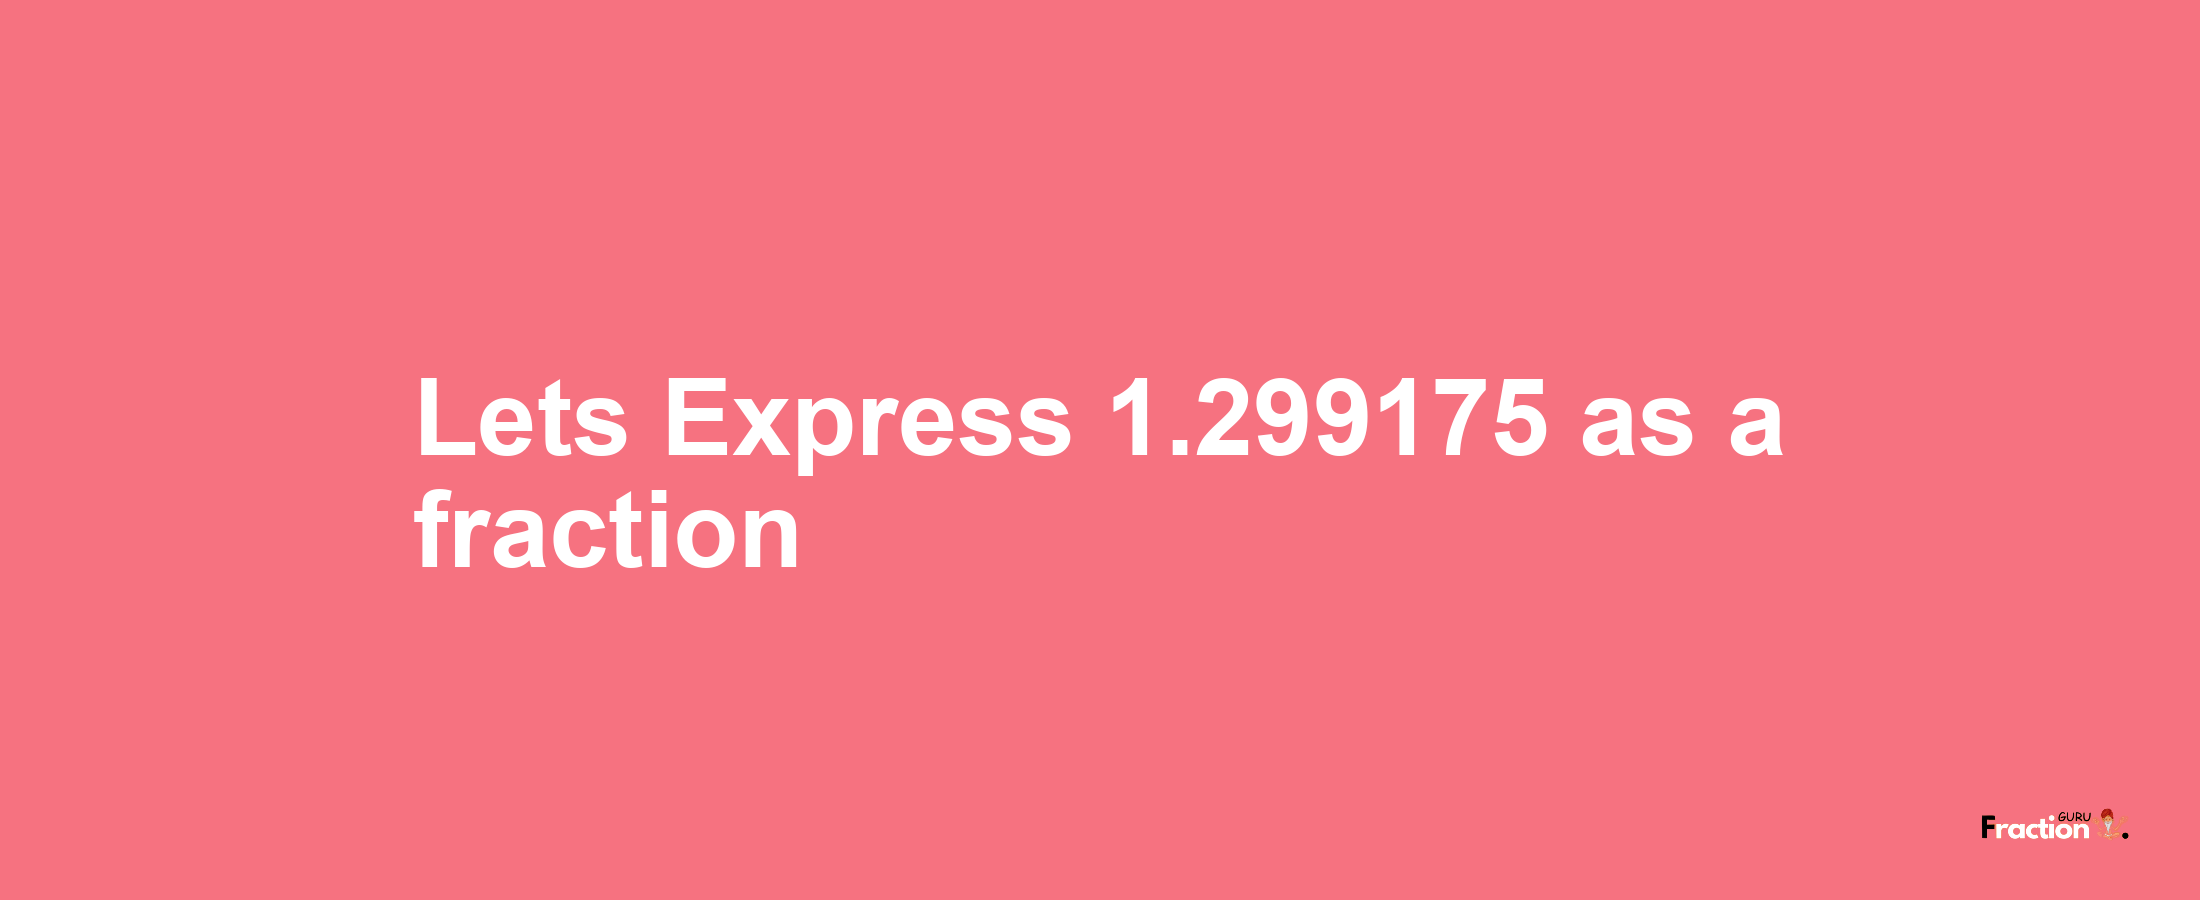 Lets Express 1.299175 as afraction